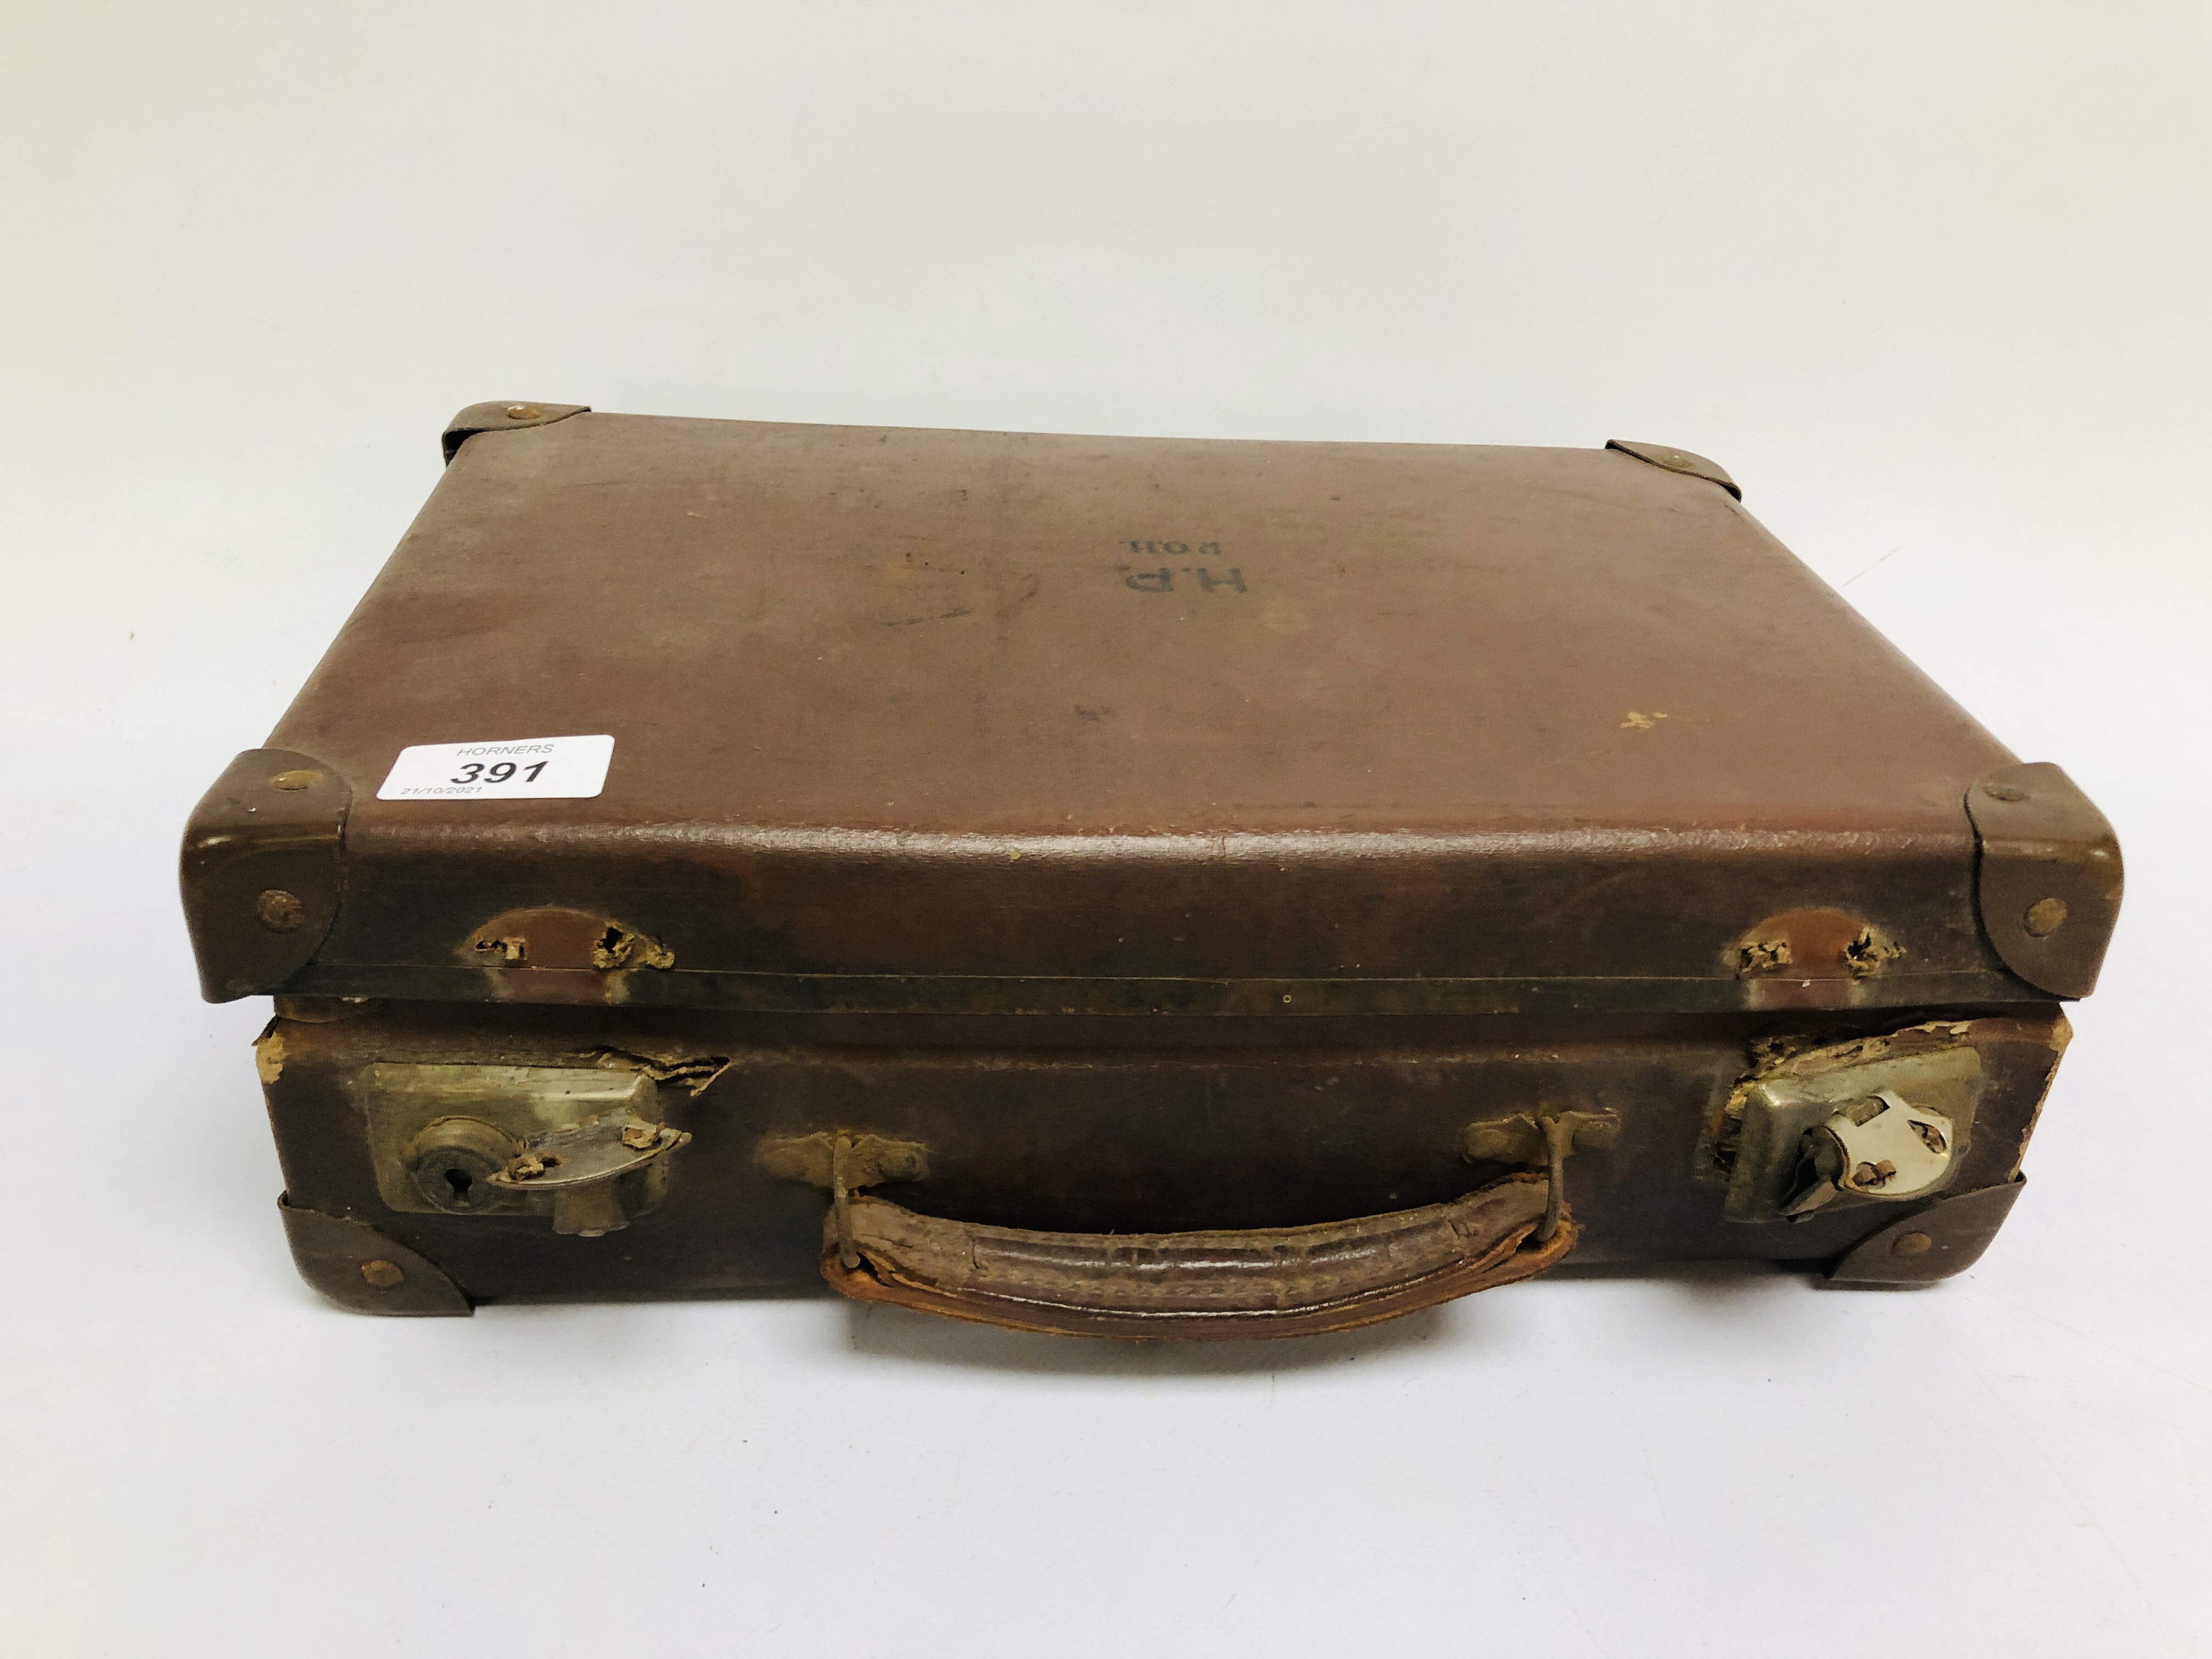 A VINTAGE CASE CONTAINING A COLLECTION OF MASONIC REGALIA TO INCLUDE SASHES, MEDALS, PAPERWORK, - Image 9 of 10